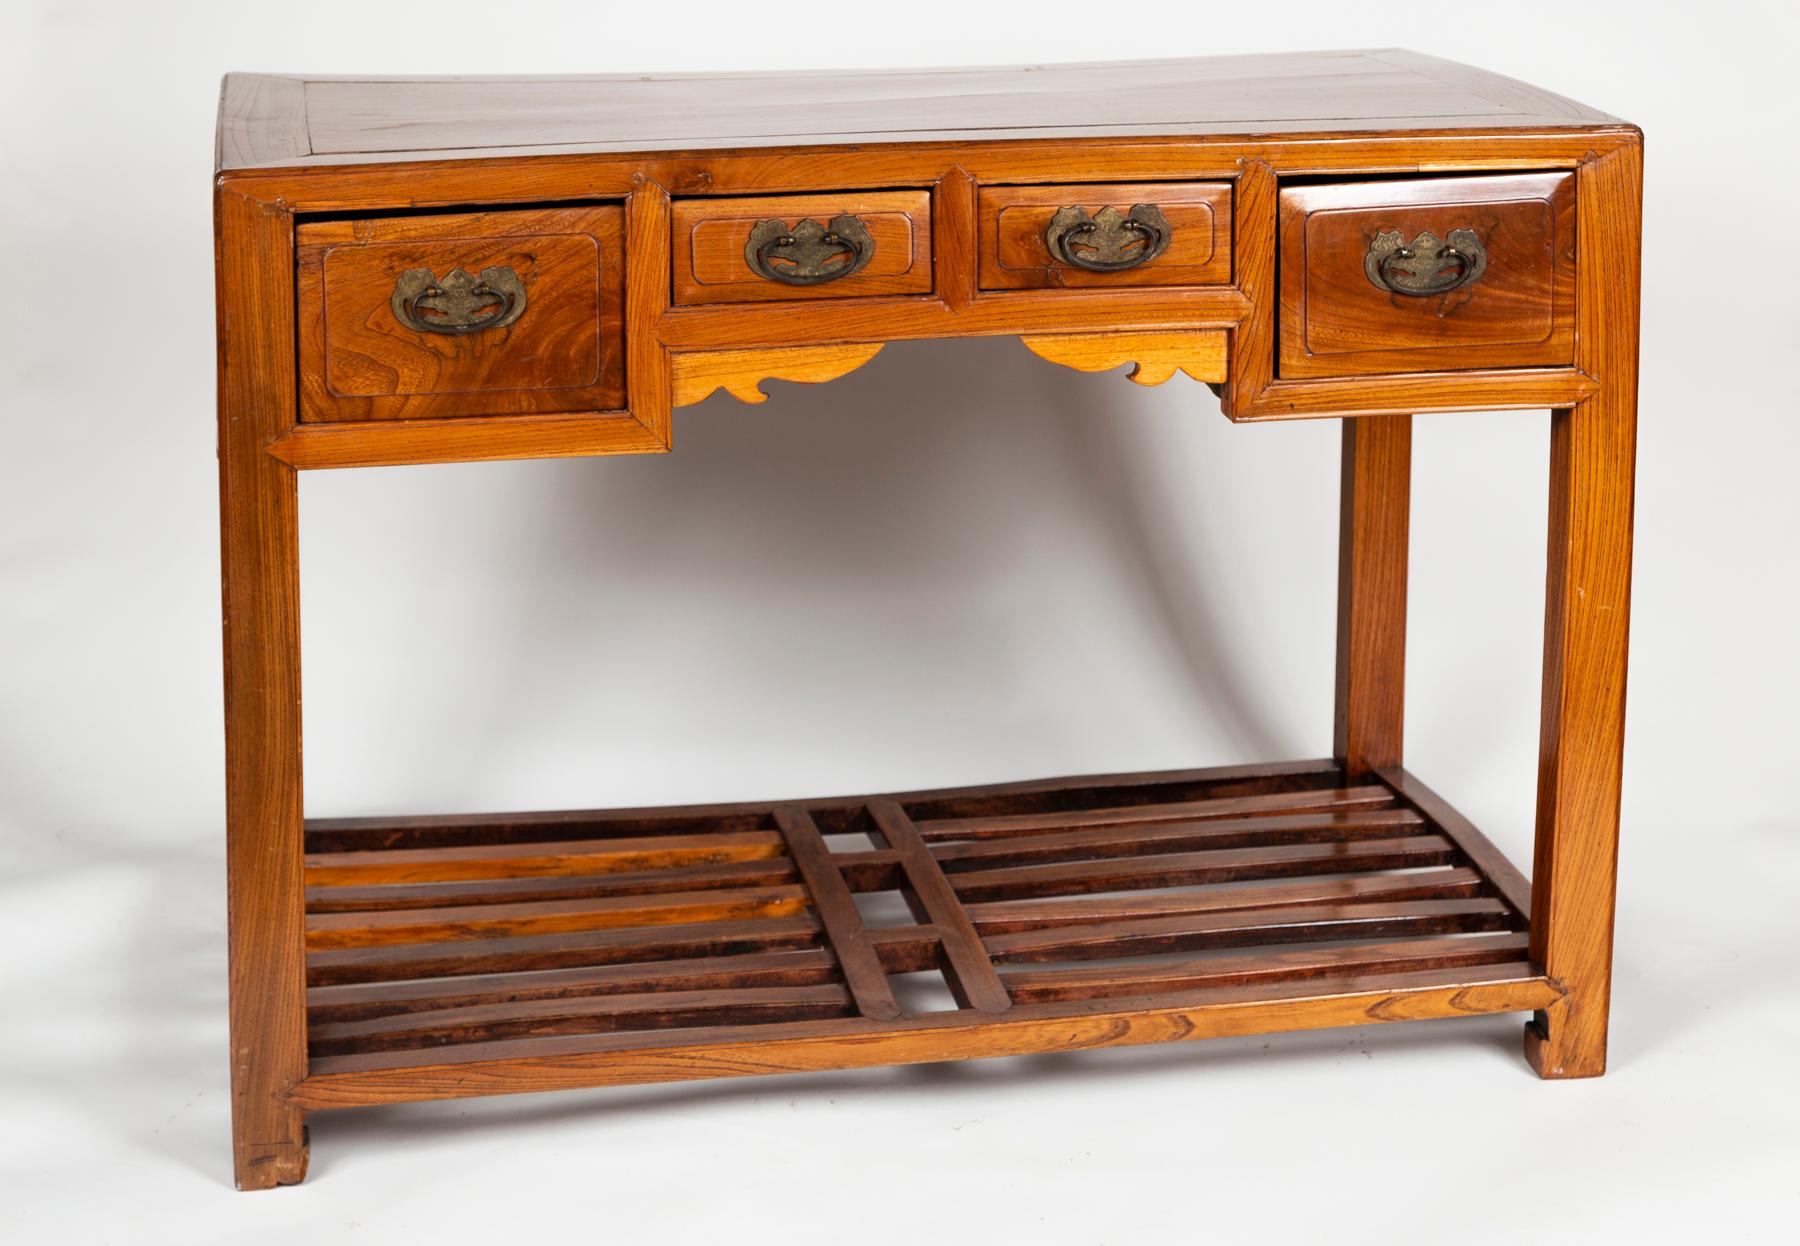 Antique Chinese Console Table, 20th Century. Rectangular table with four drawers with original hardware and lower shelf. Provincial Chinese design with lacquered finish.